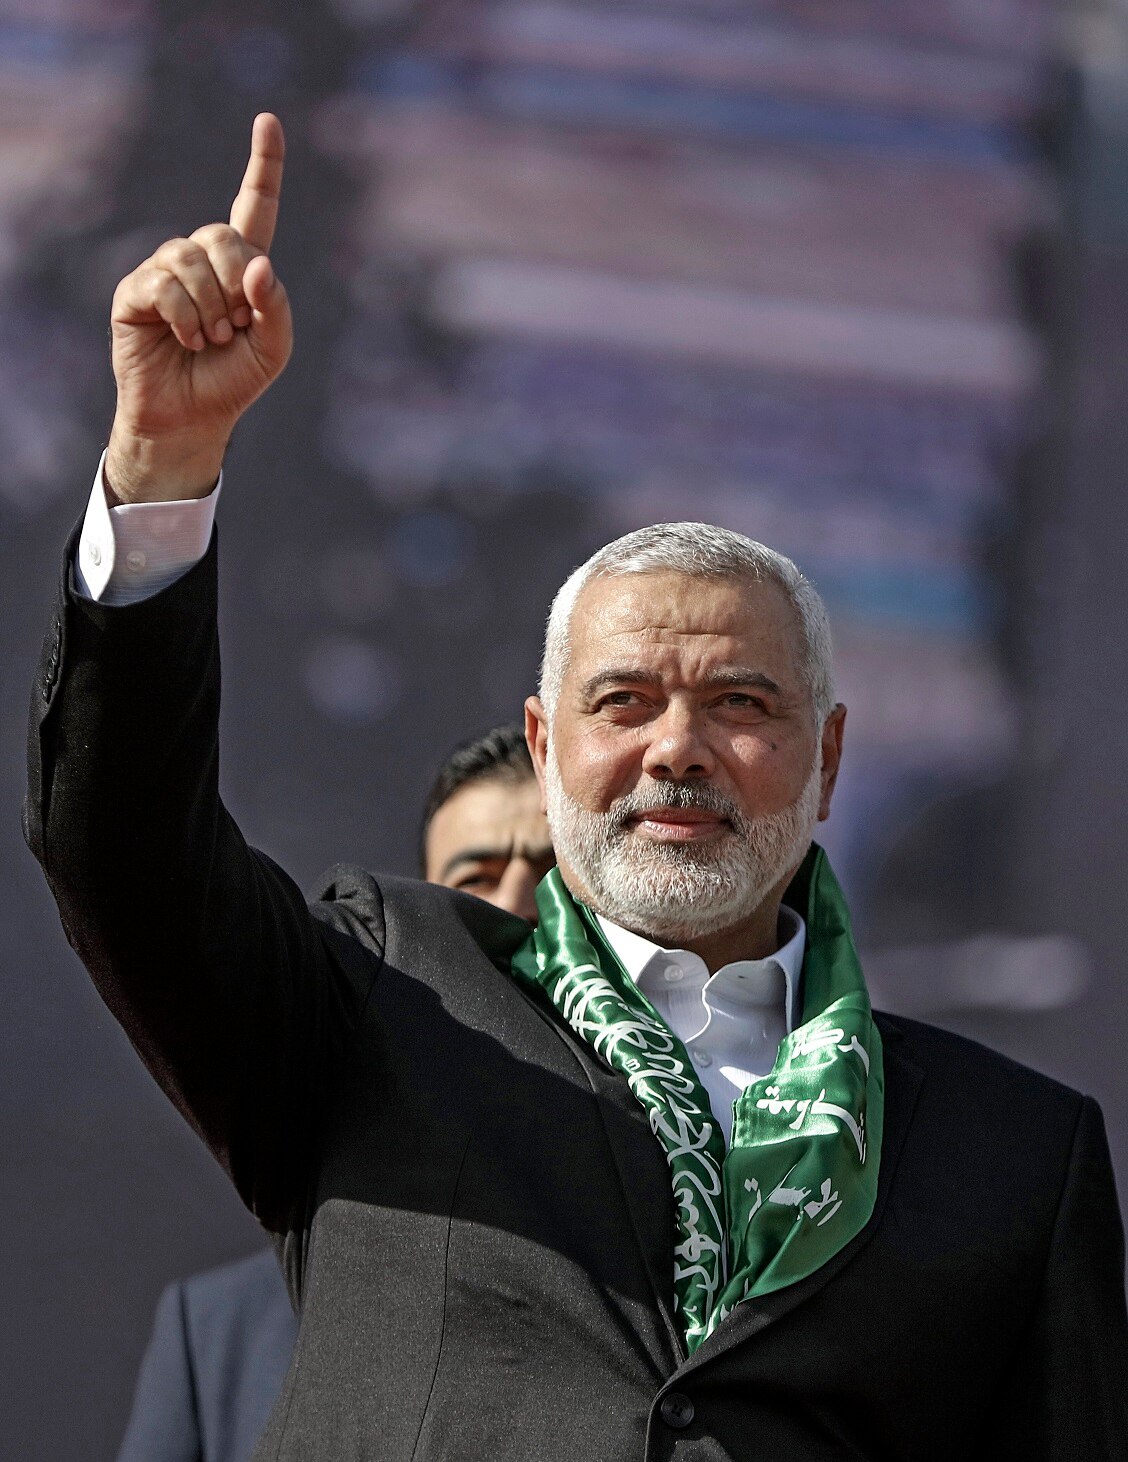 Hamas personality Sheikh Ismail Haniyeh attends a Hamas convene to symbol a group's 30th anniversary, in Gaza City, Gaza Strip, 14 Dec 2017.